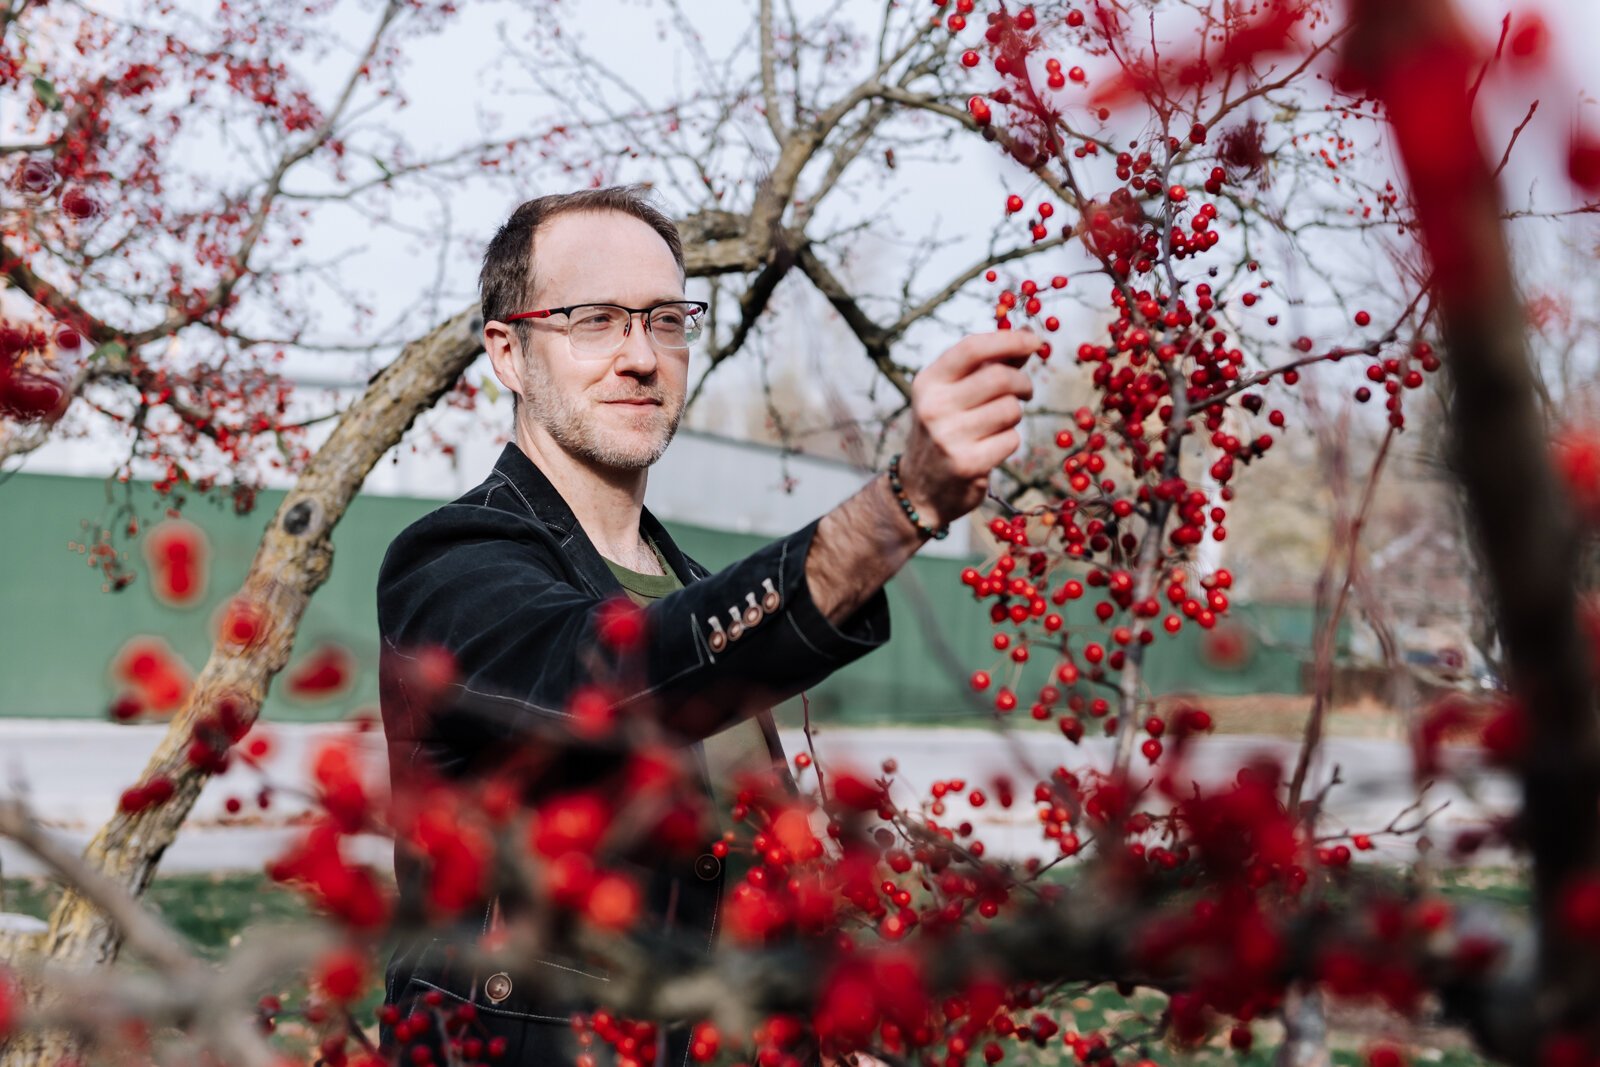 Michael Hoag forages for edible plants and fruit including crab apples at Foster Park in Fort Wayne.